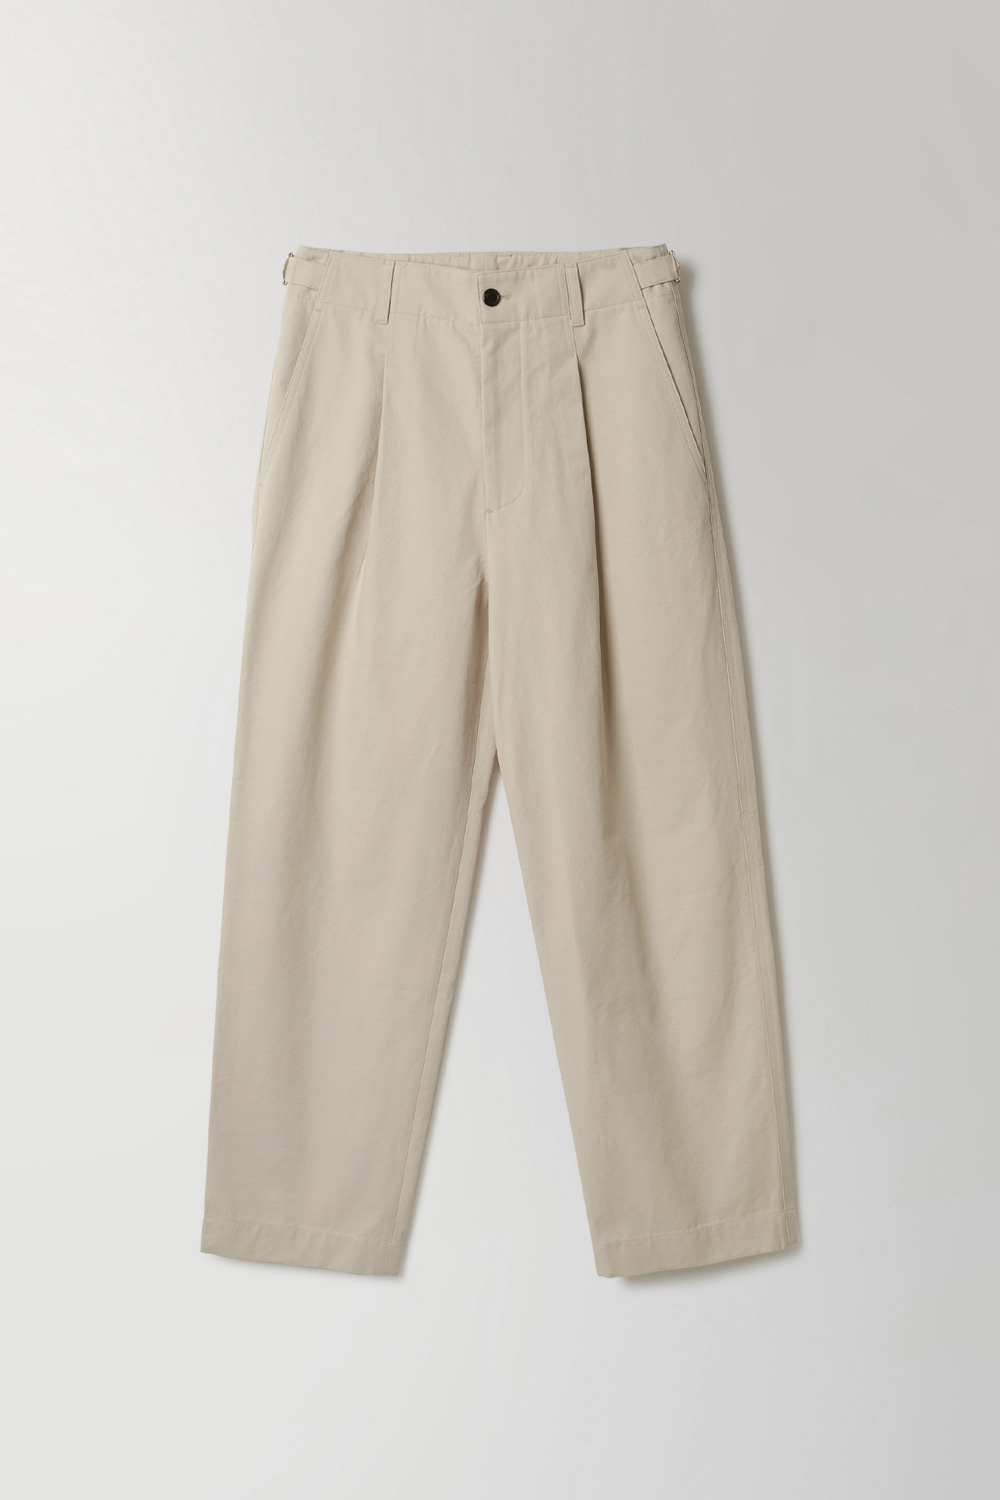 STRUCTURED CHINO PANTS - SAND BEIGE